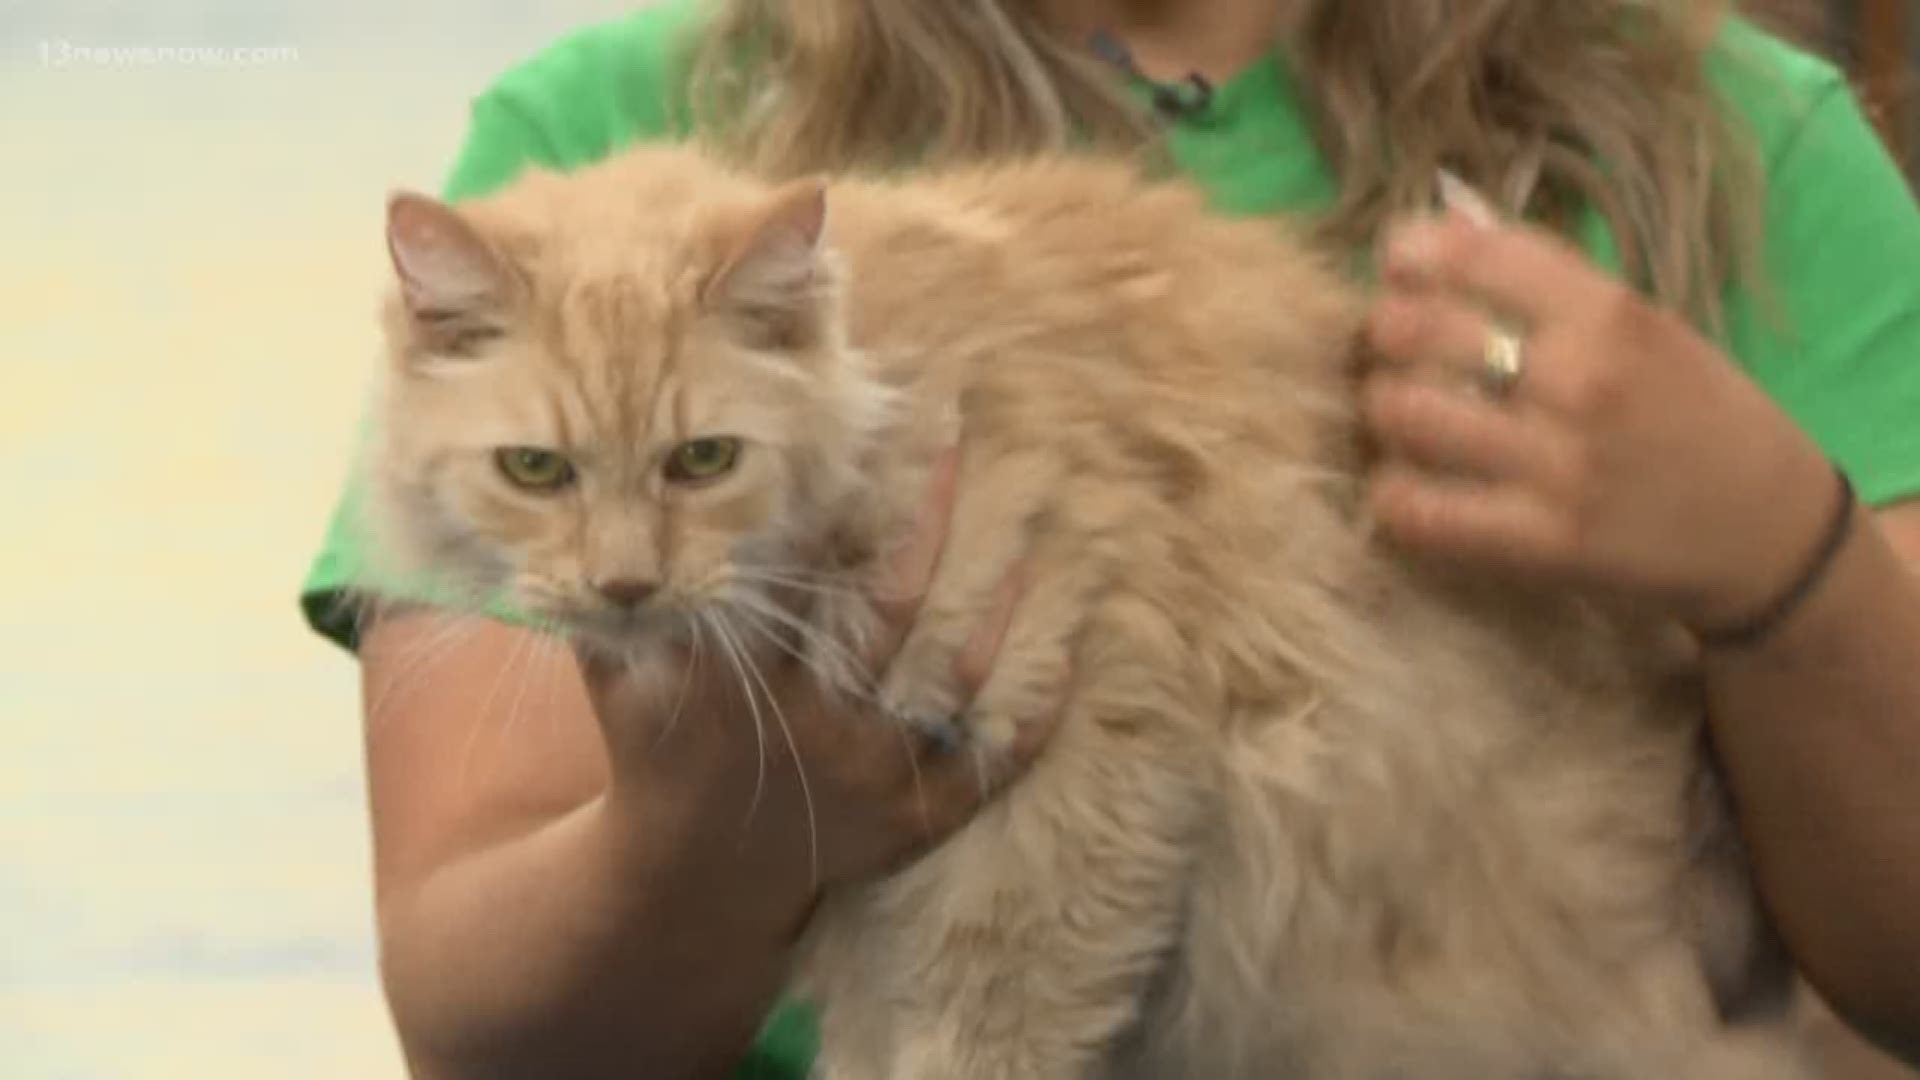 The Isle of Wight Animal Services brought in Oscar, a 12-year-old senior cat.